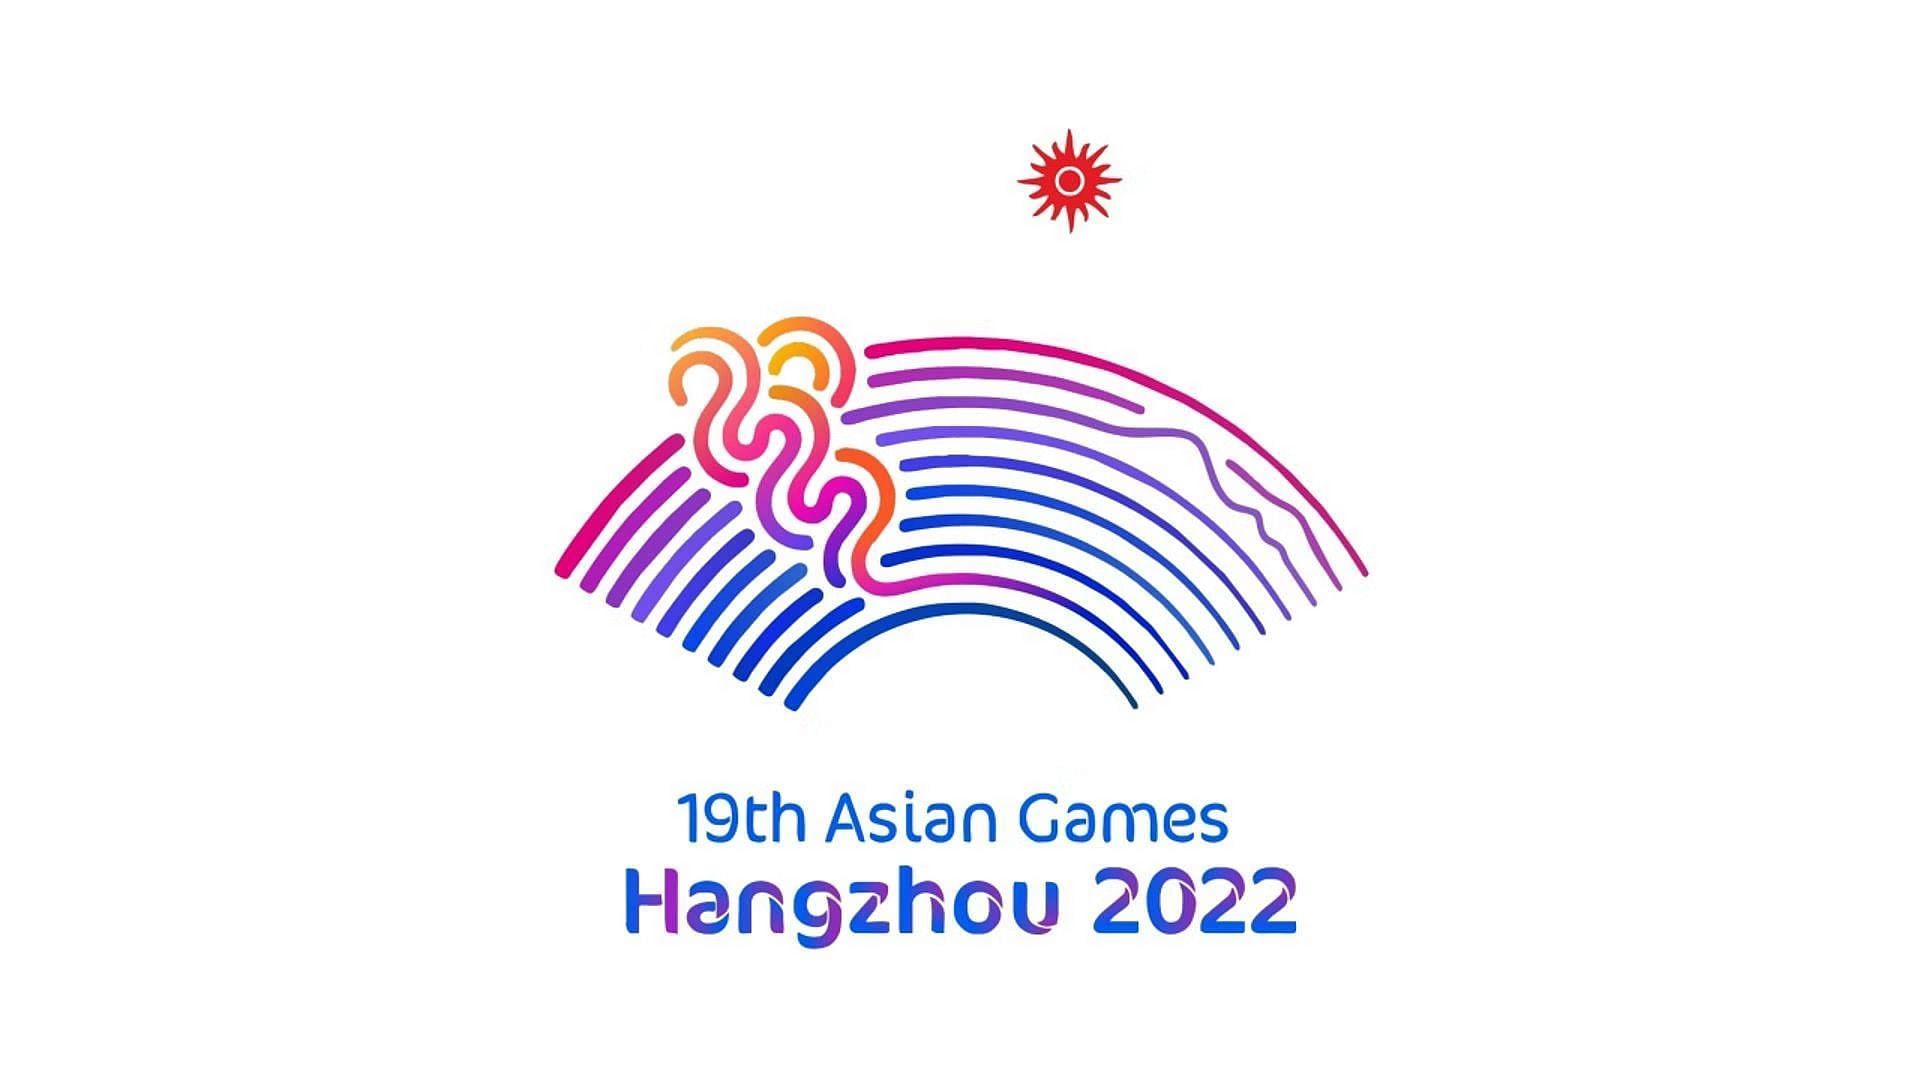 India adds 17 names to Asian Games squad